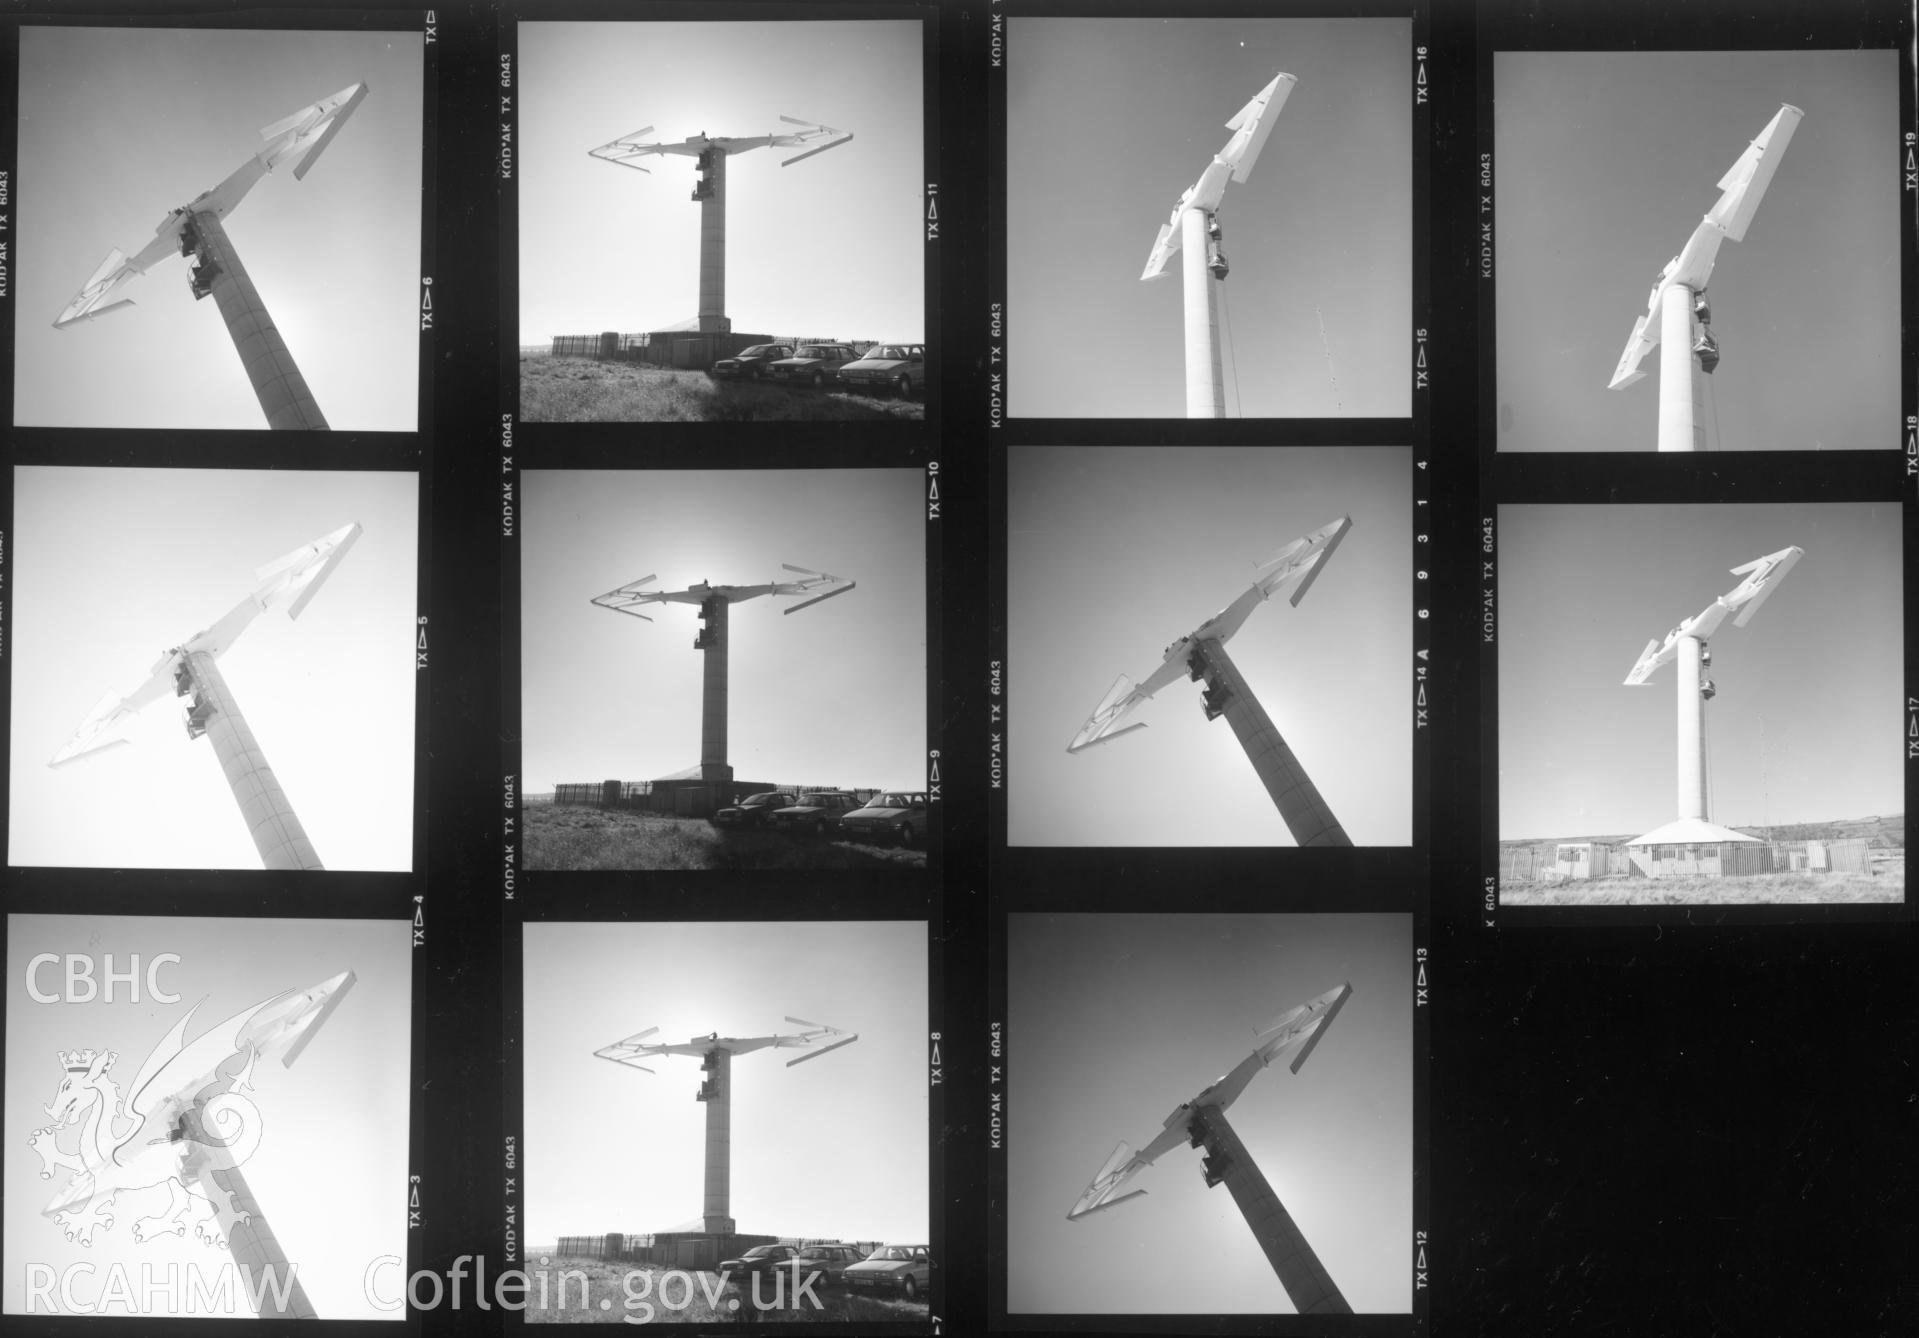 Contact sheet 2b of views of the prototype wind turbine at Carmarthen Bay in 1986. From the Central Office of Information Collection.